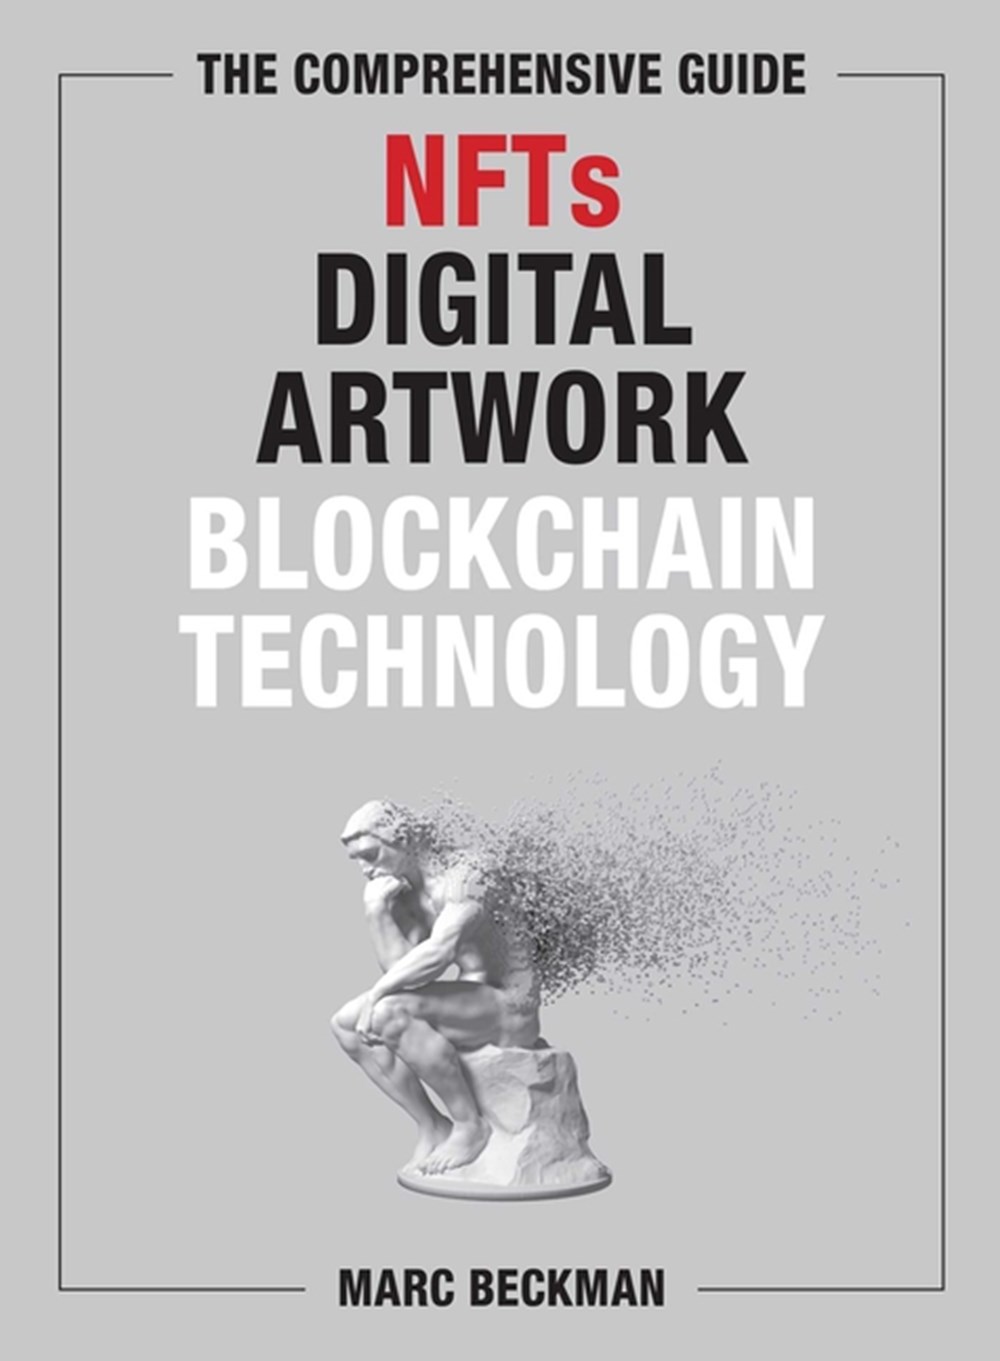 Comprehensive Guide to Nfts, Digital Artwork, and Blockchain Technology